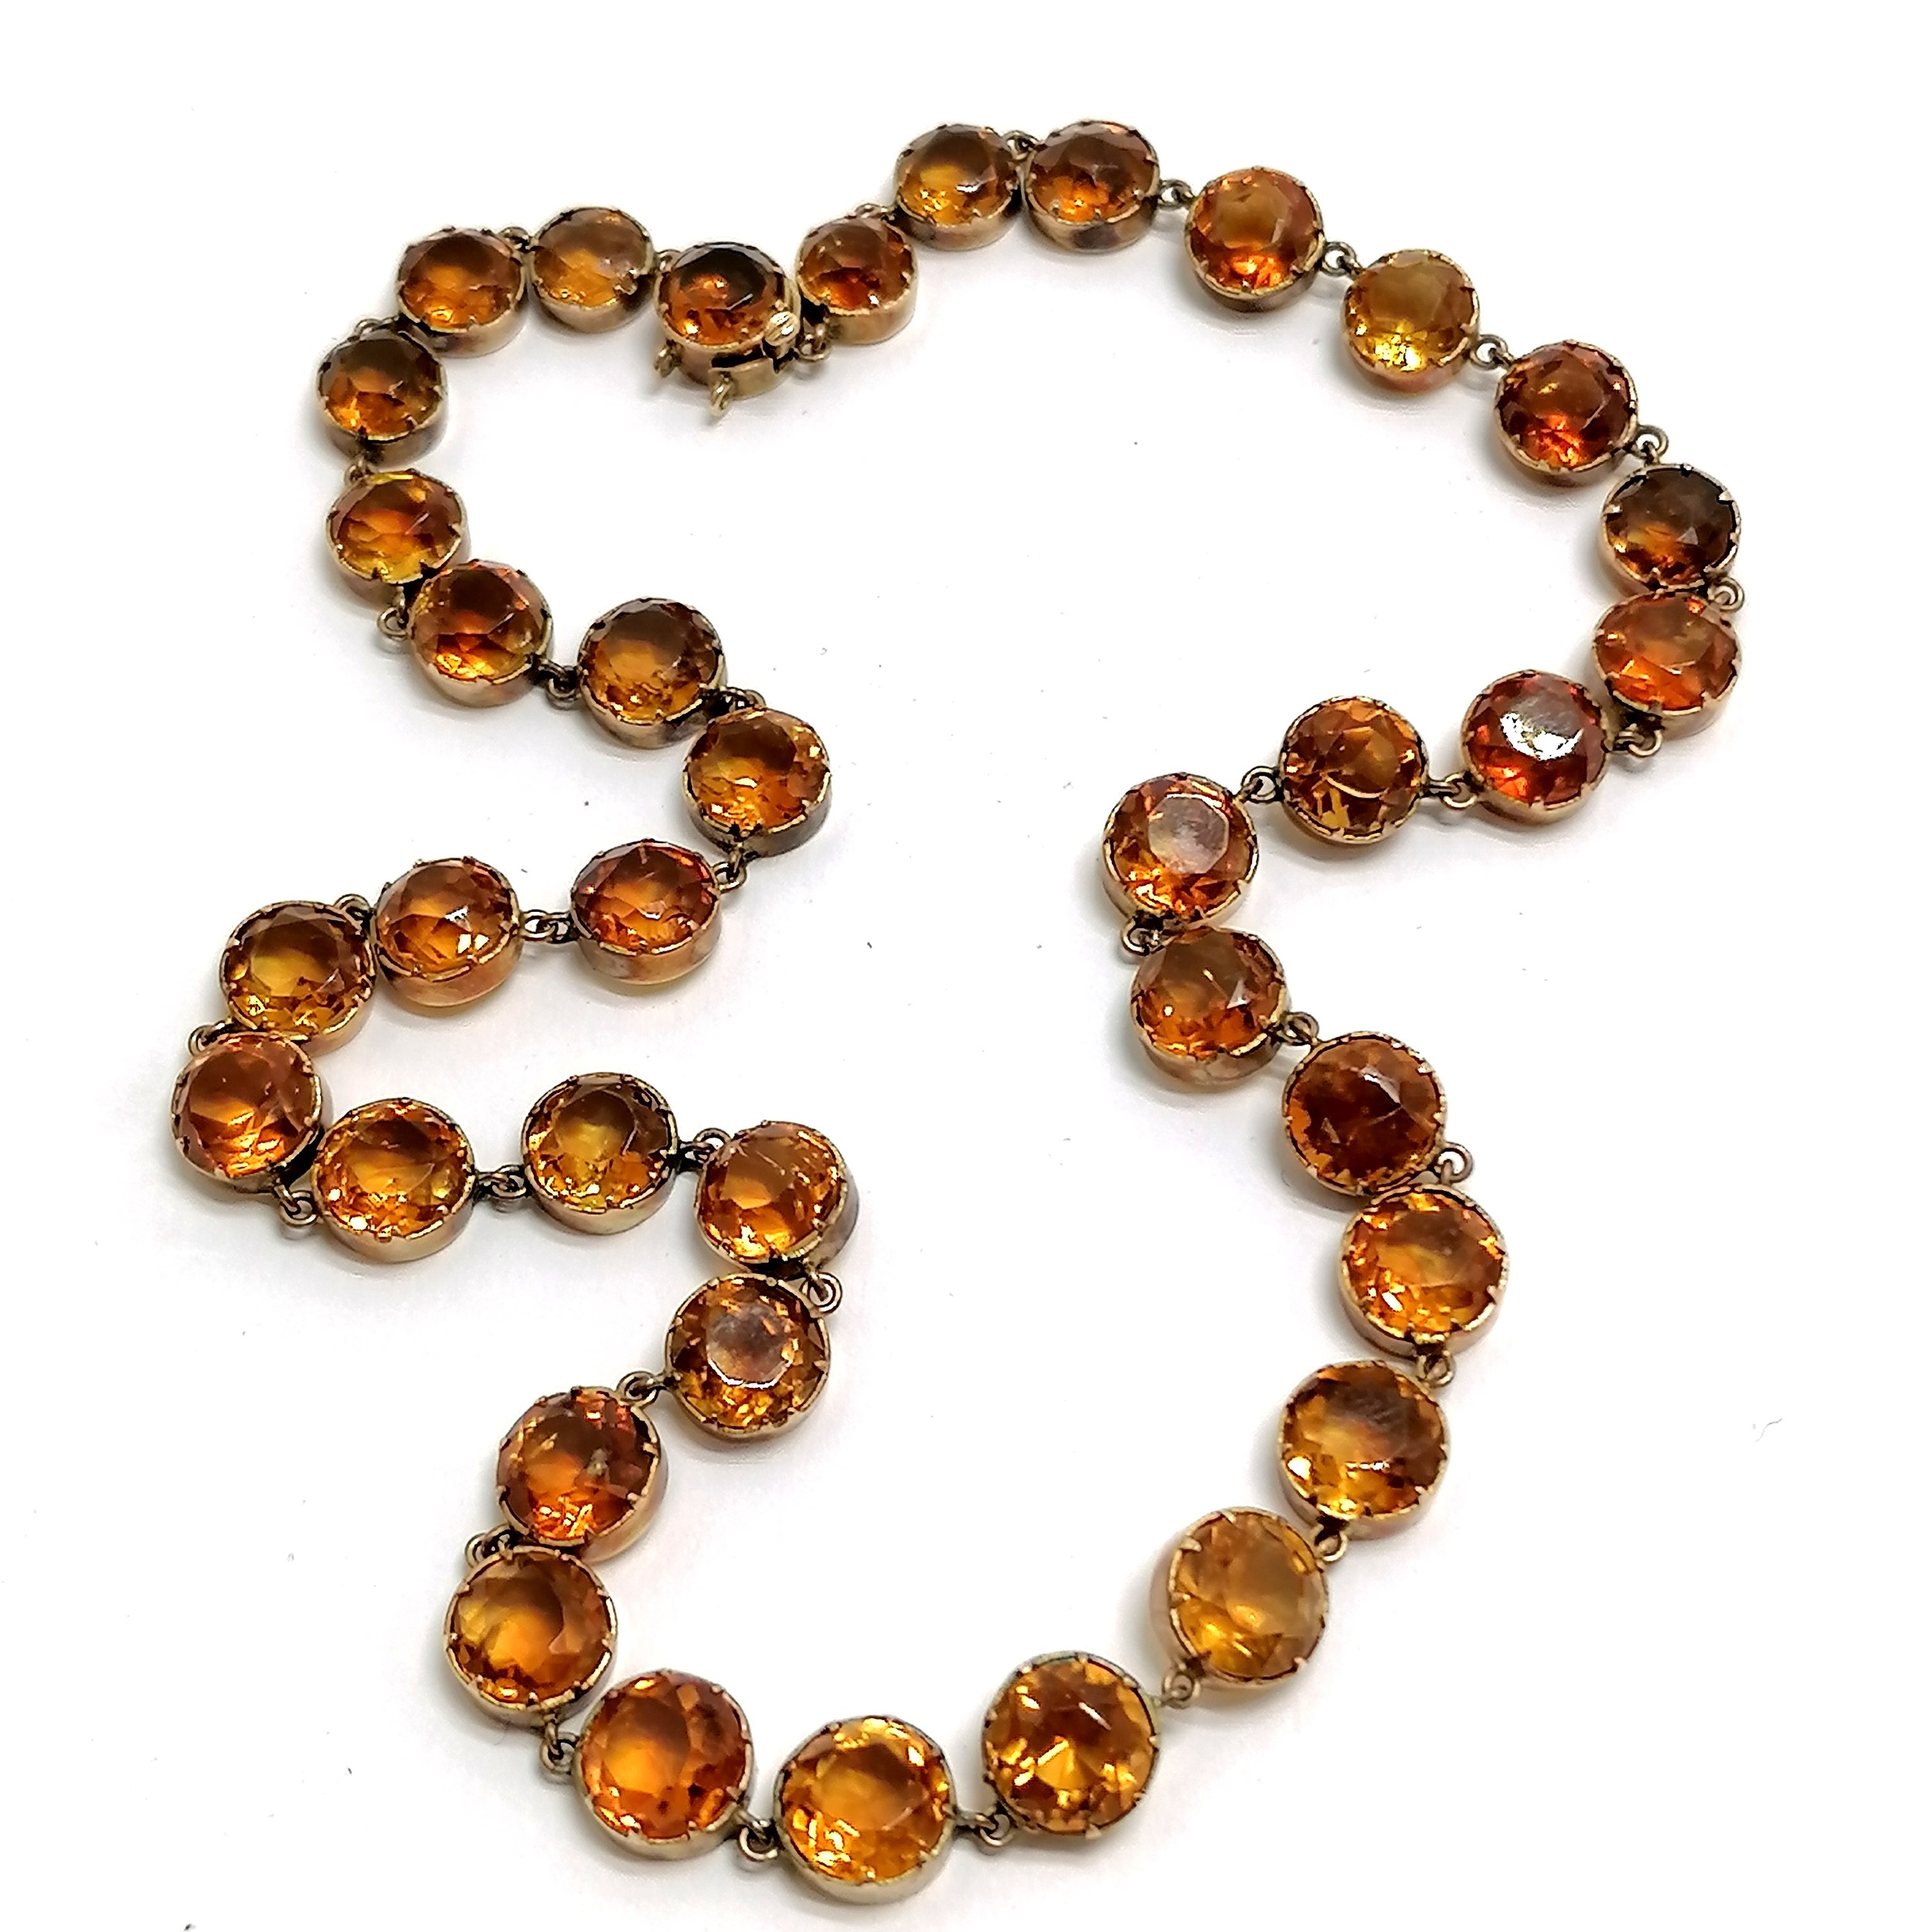 Antique unmarked rose gold citrine stone set necklace - 38cm & 20.5g total weight ~ no obvious